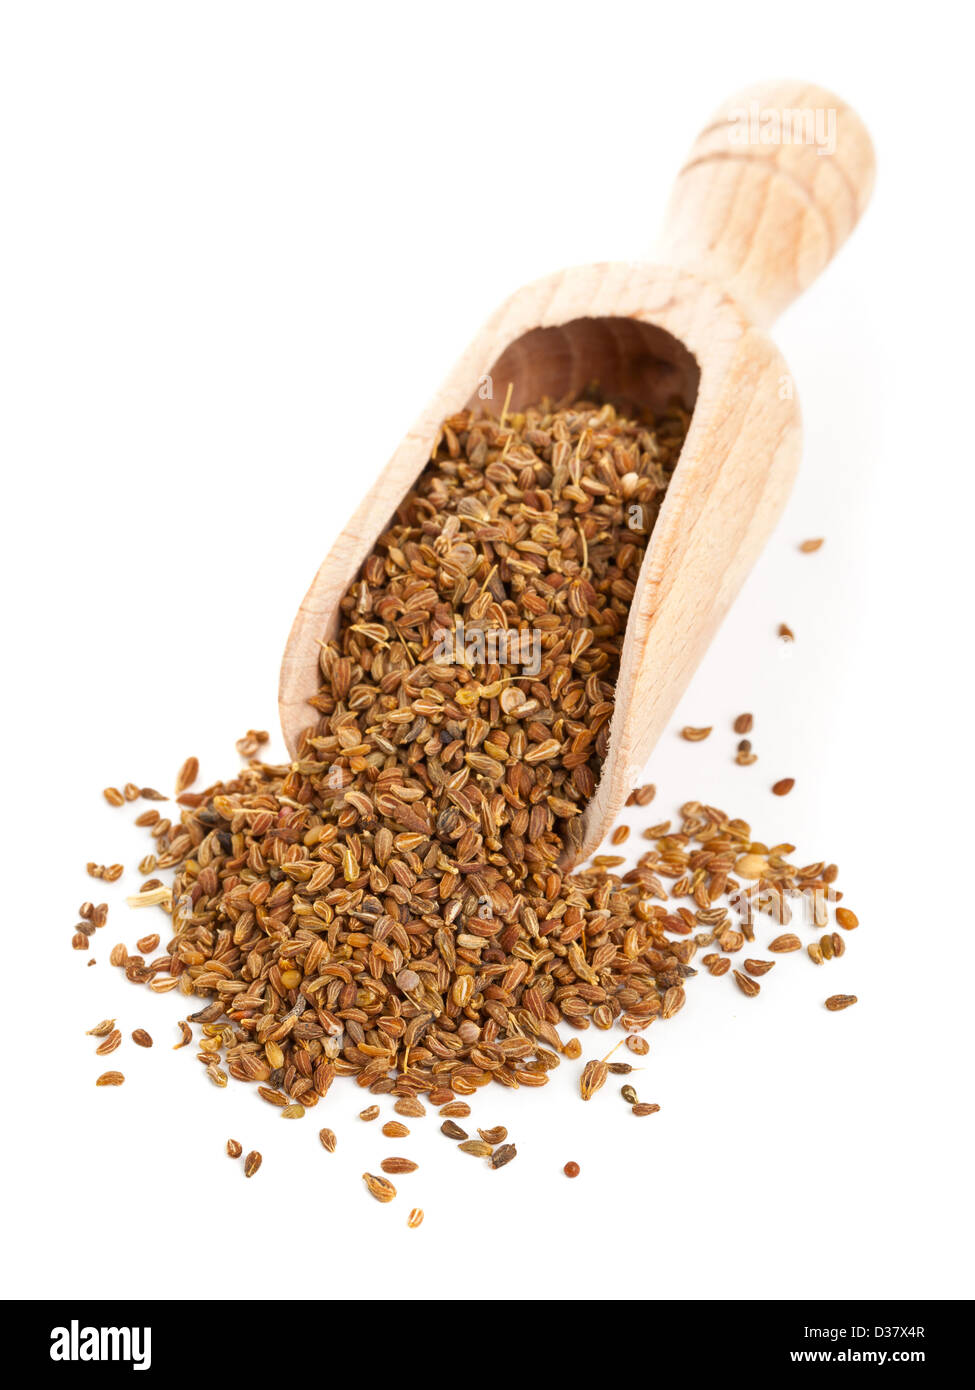 Anise seed in wooden scoop over white background Stock Photo